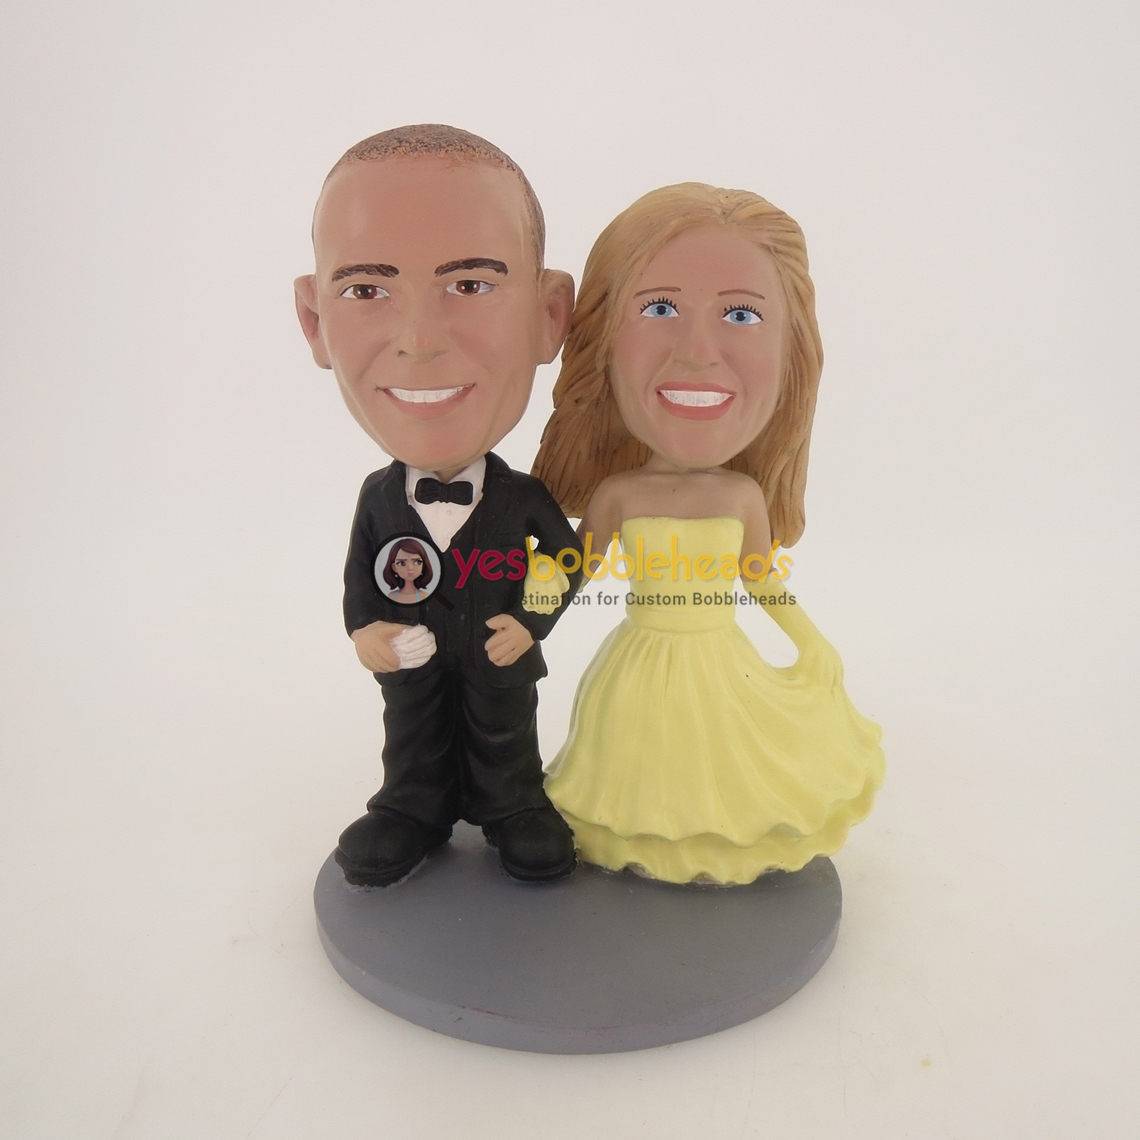 Picture of Custom Bobblehead Doll: Arms Together Bride & Groom